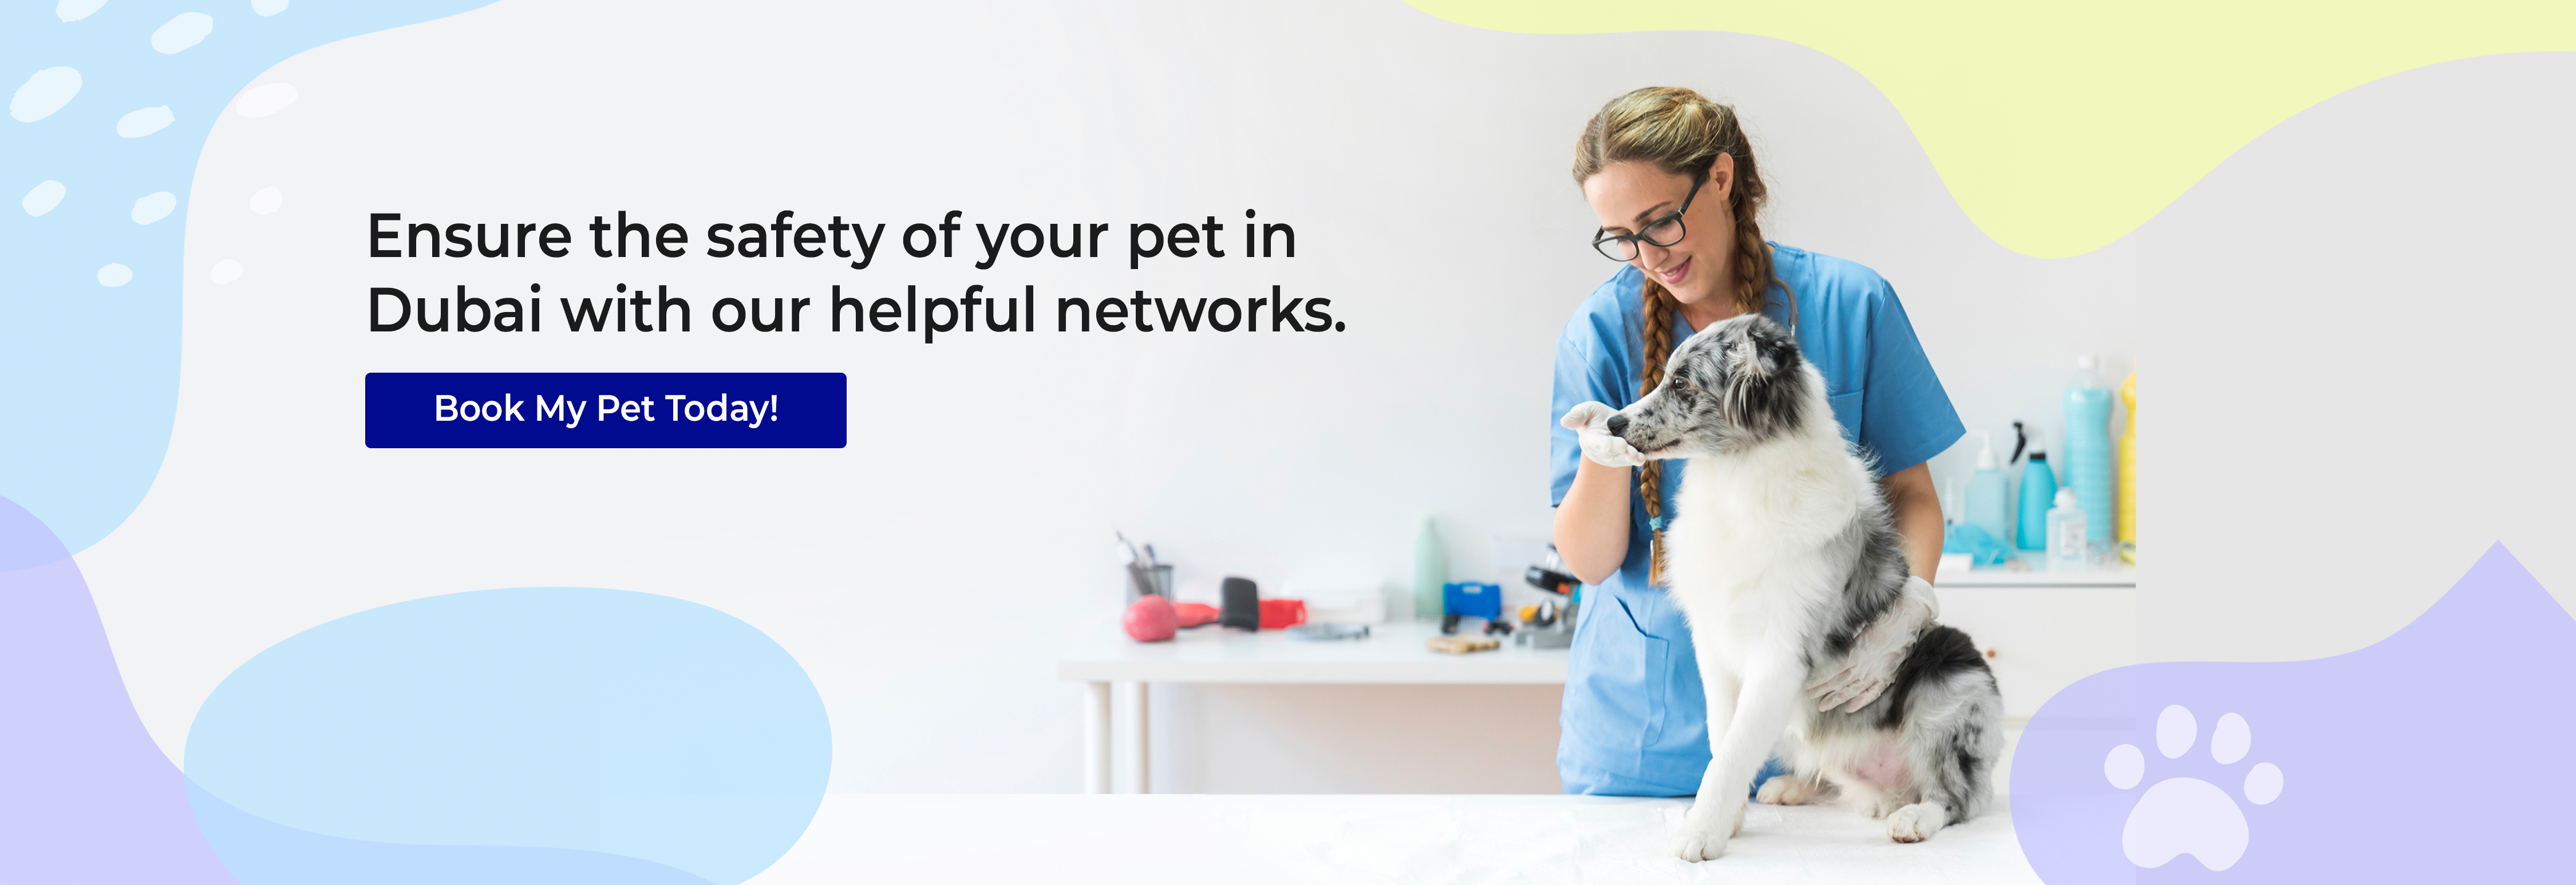 Ensure the safety of your pet in Dubai with our helpful networks Book My Pet Today